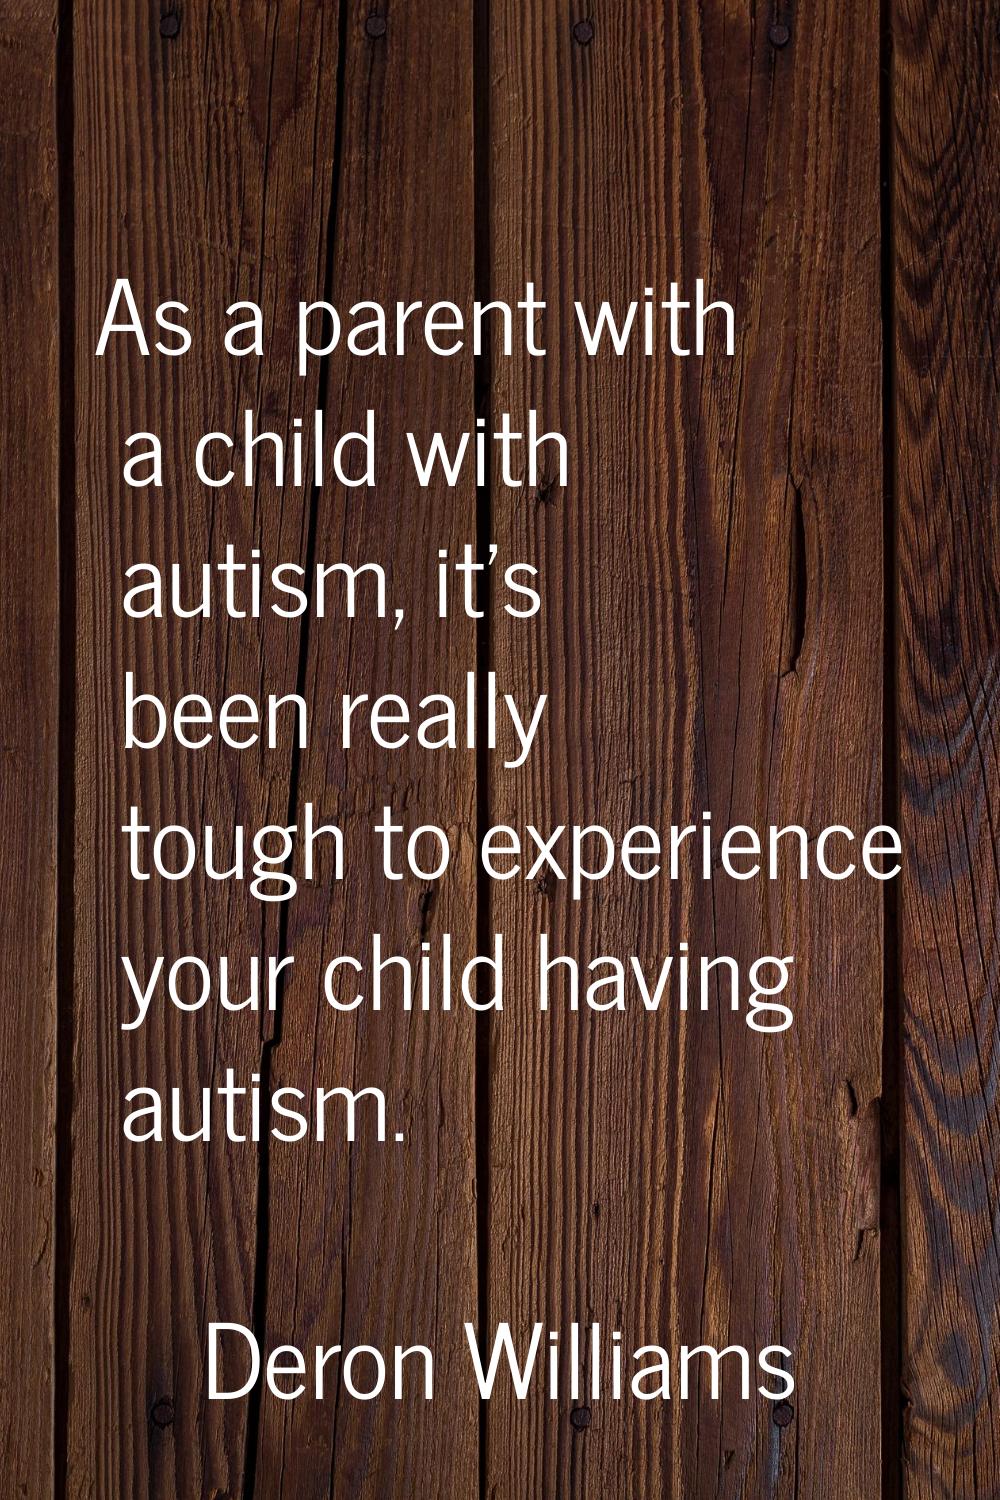 As a parent with a child with autism, it's been really tough to experience your child having autism